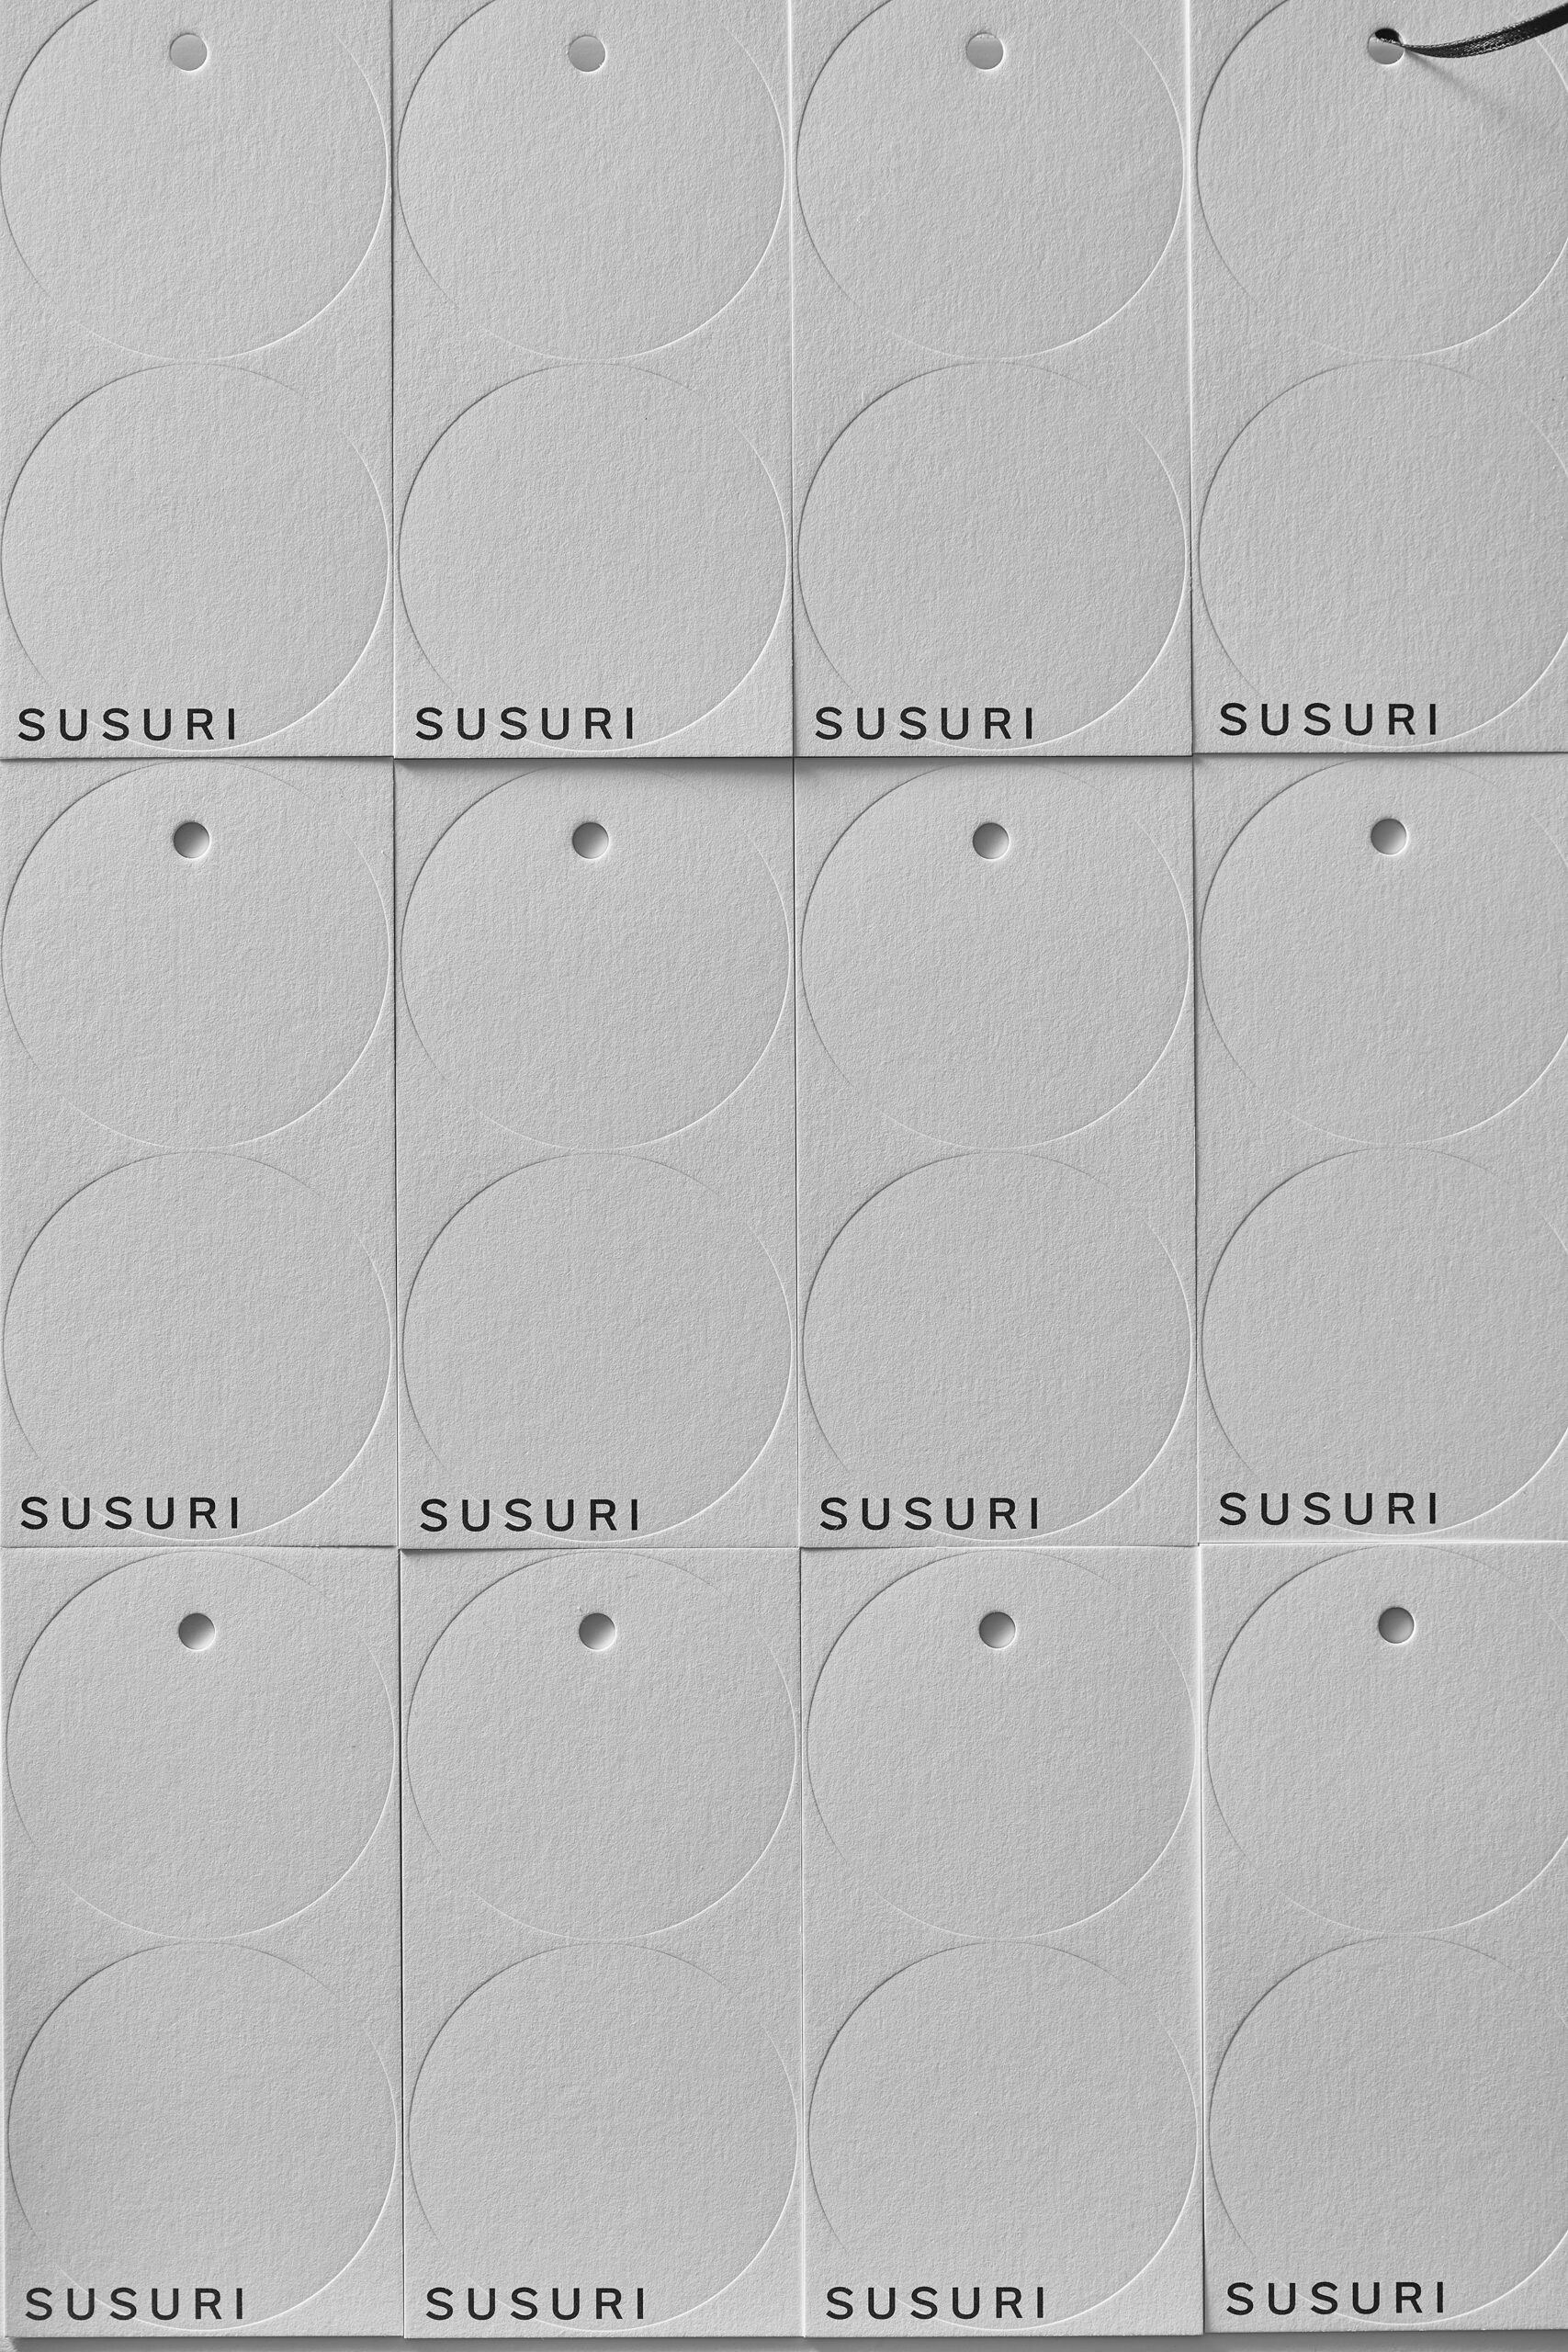 SUSURI paper cloth tags with blind embossed double circles